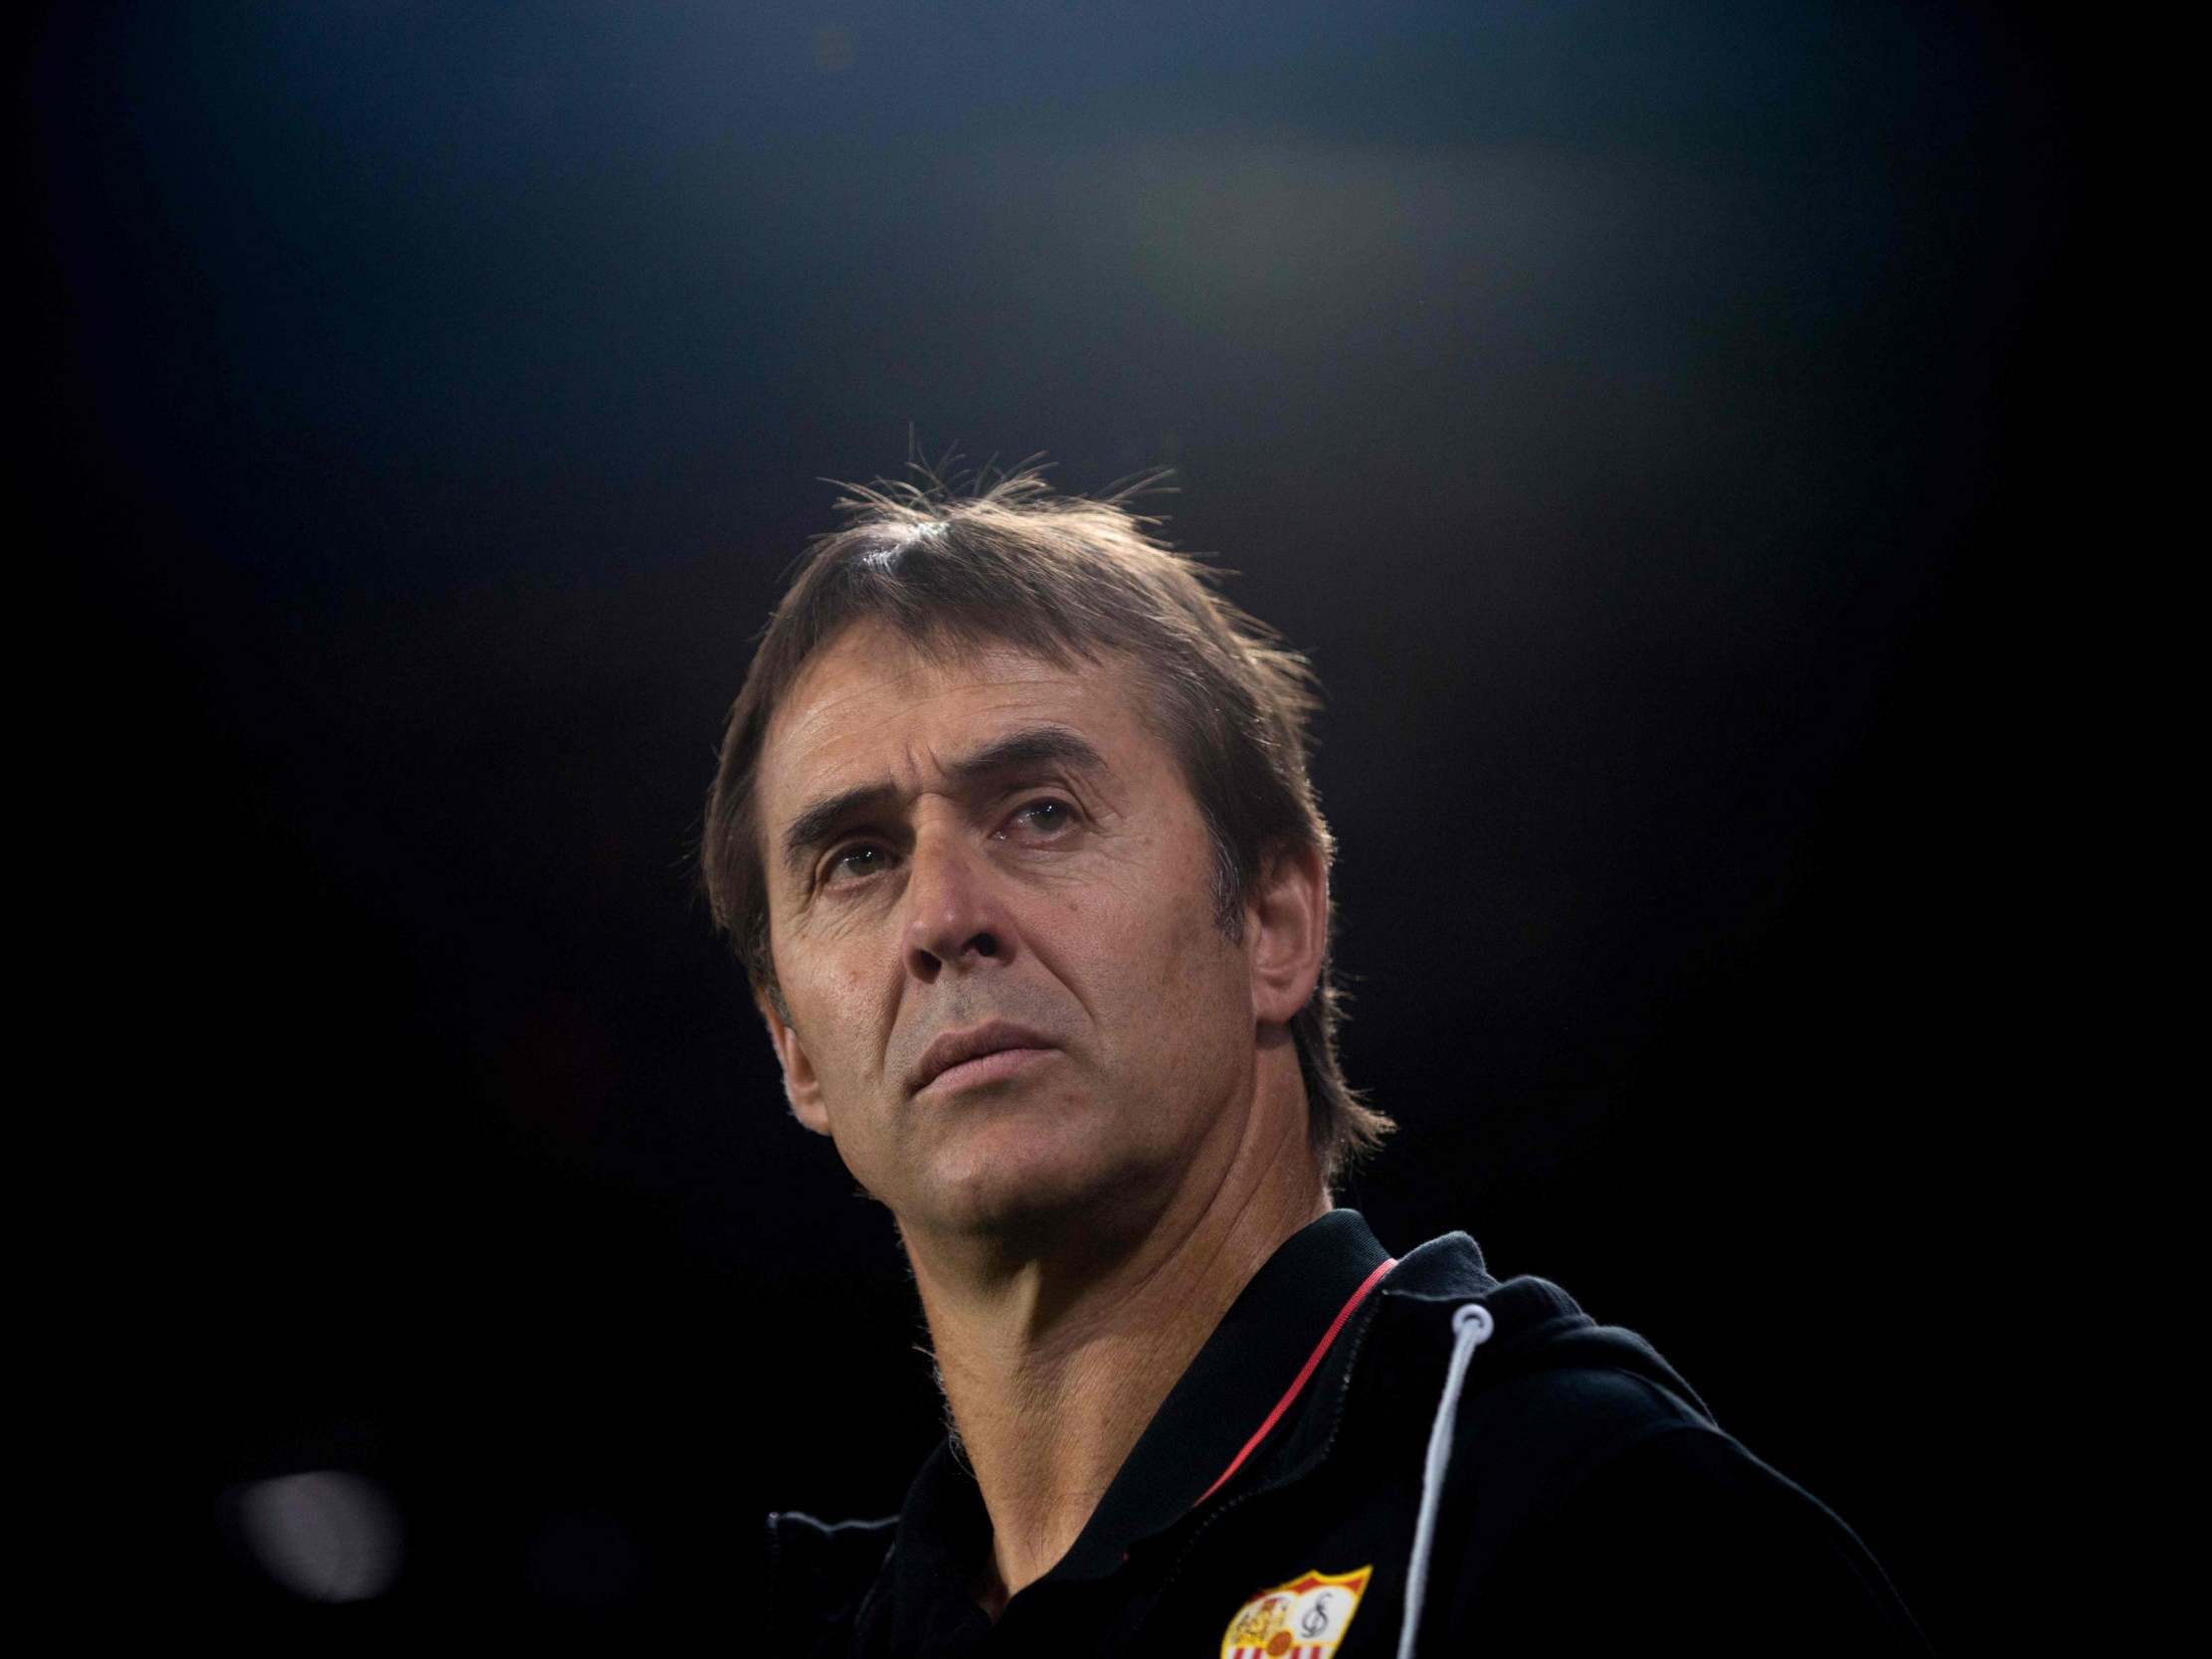 Julen Lopetegui has guided Sevilla to third place in La Liga at the turn of the year